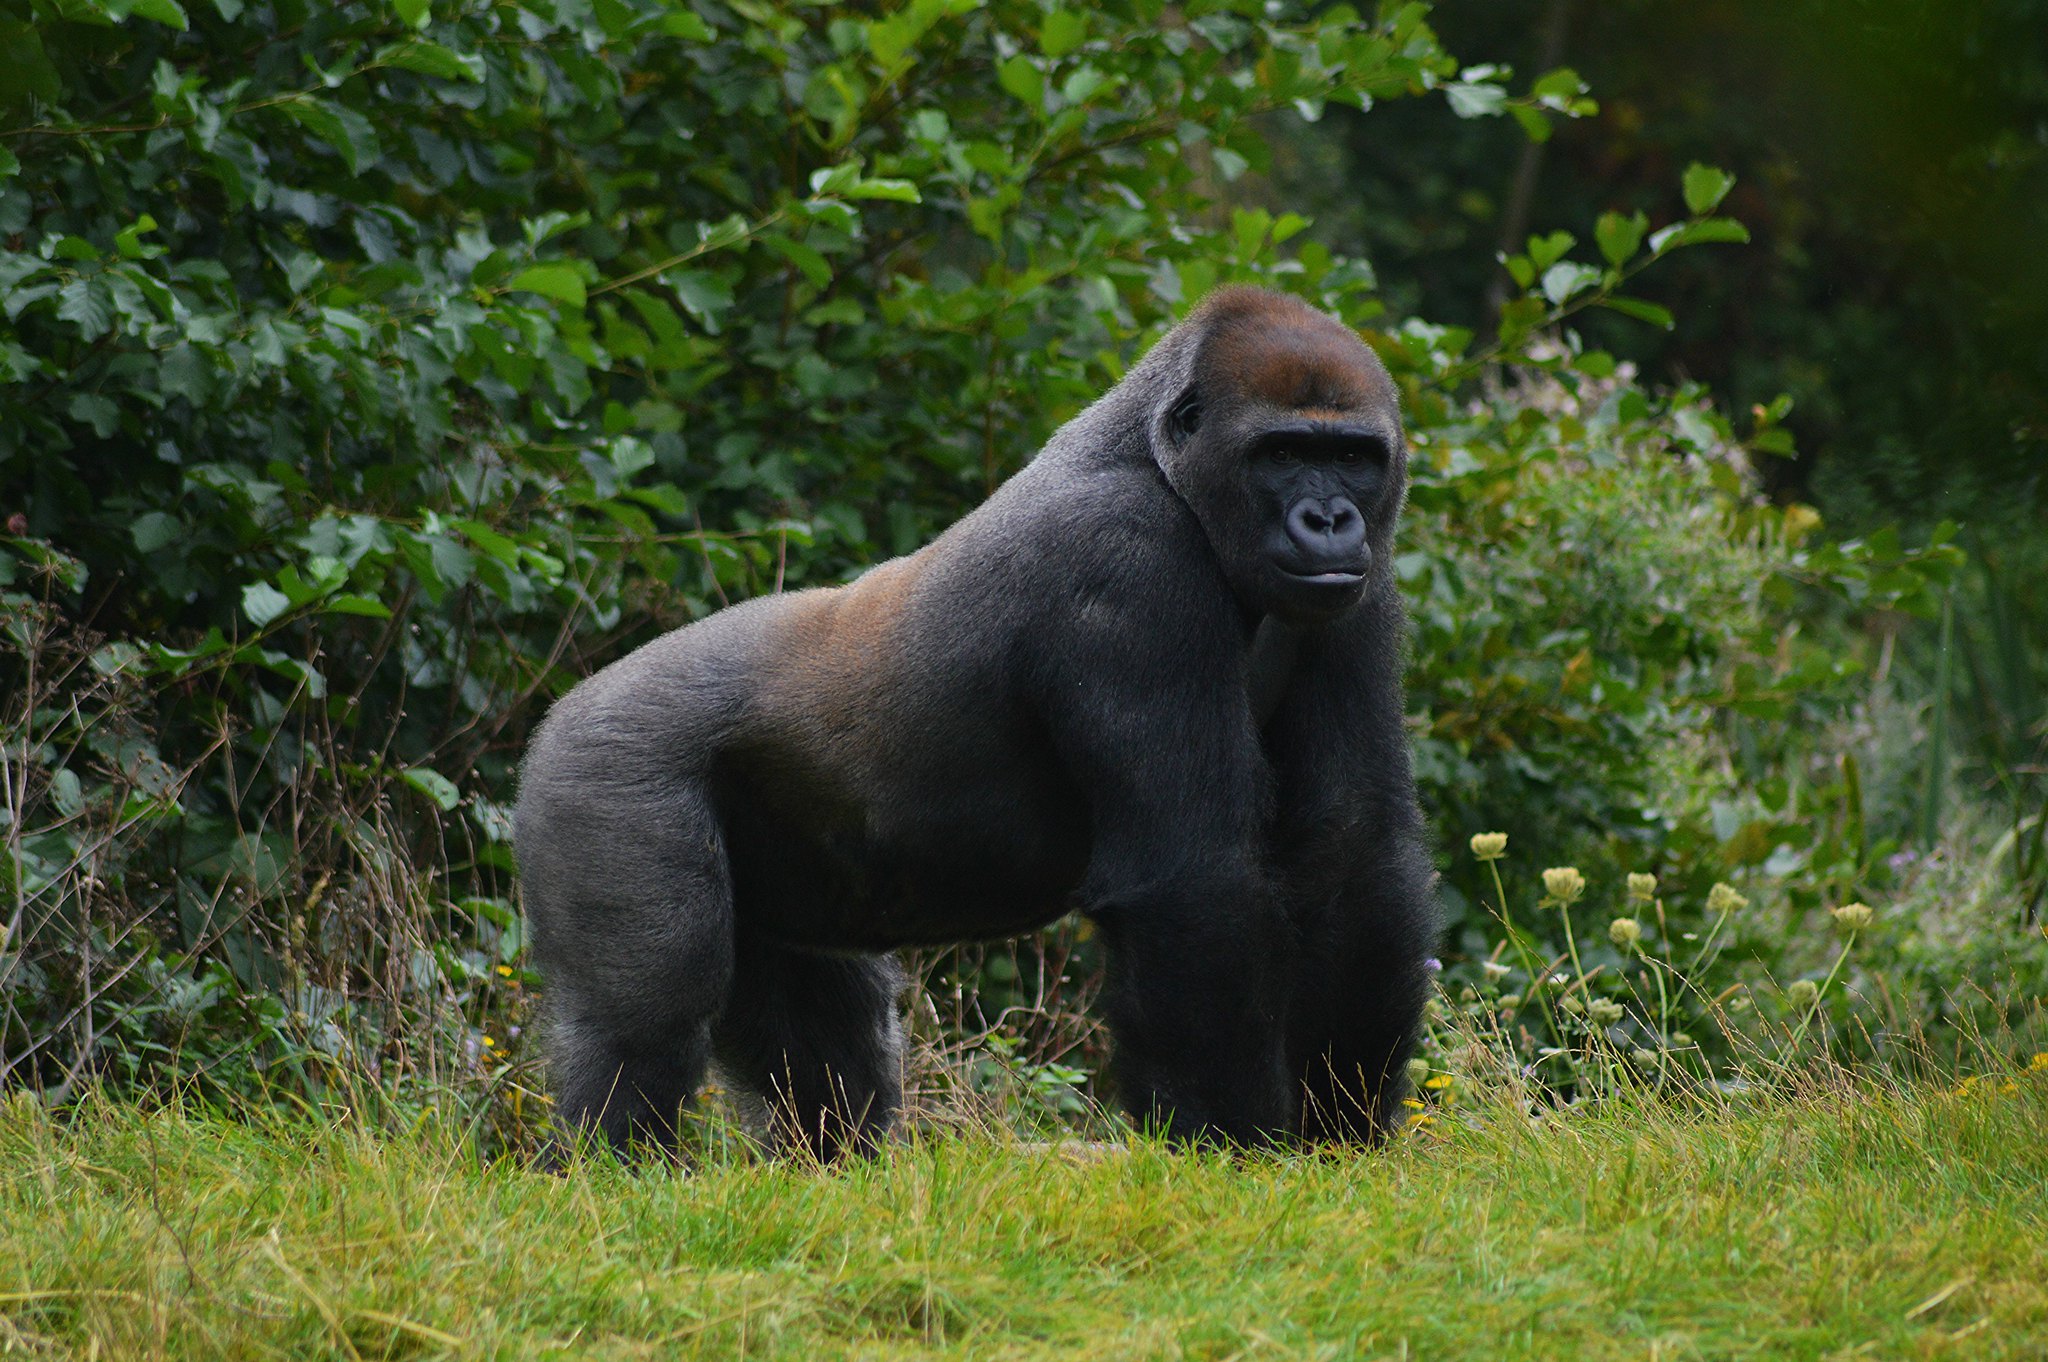 FACTS ABOUT MOUNTAIN GORILLAS